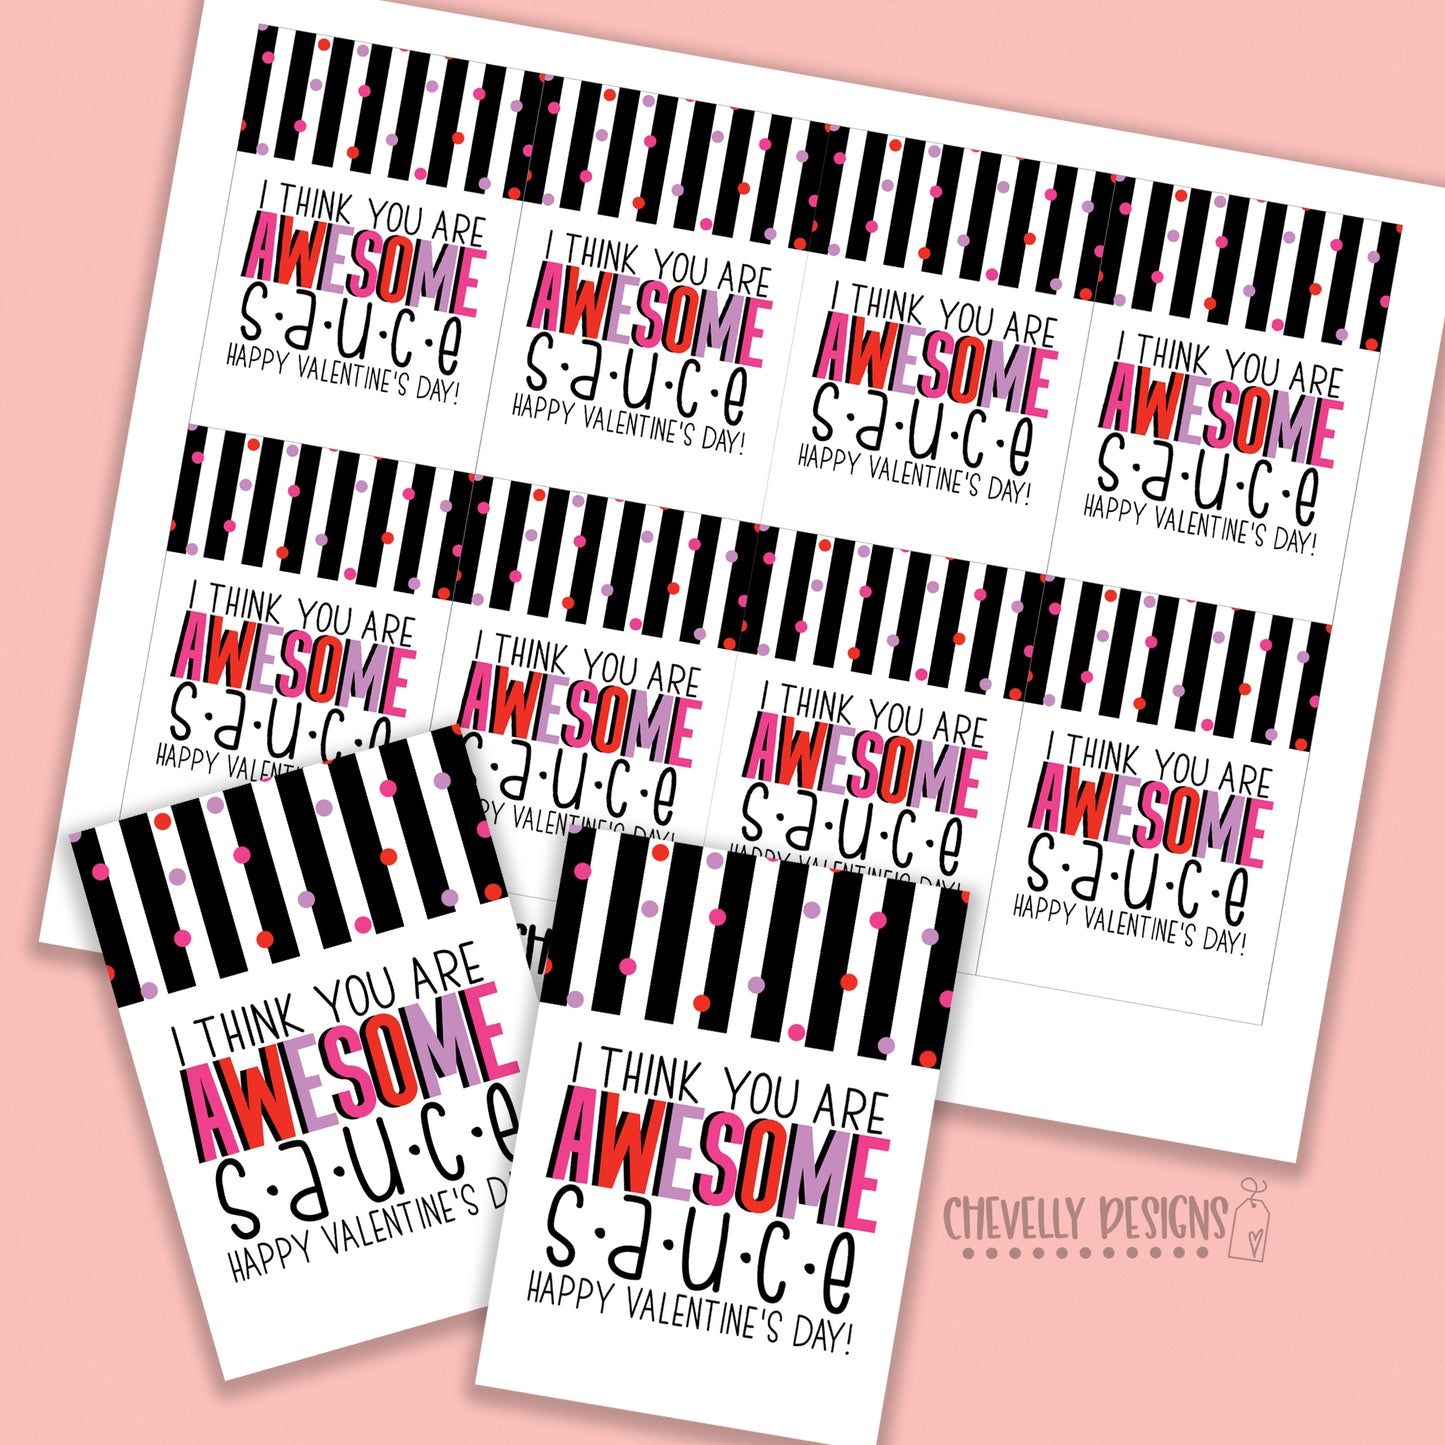 Printable Valentine's Day Cards - I Think You are Awesome Sauce >>>Instant Digital Download<<<